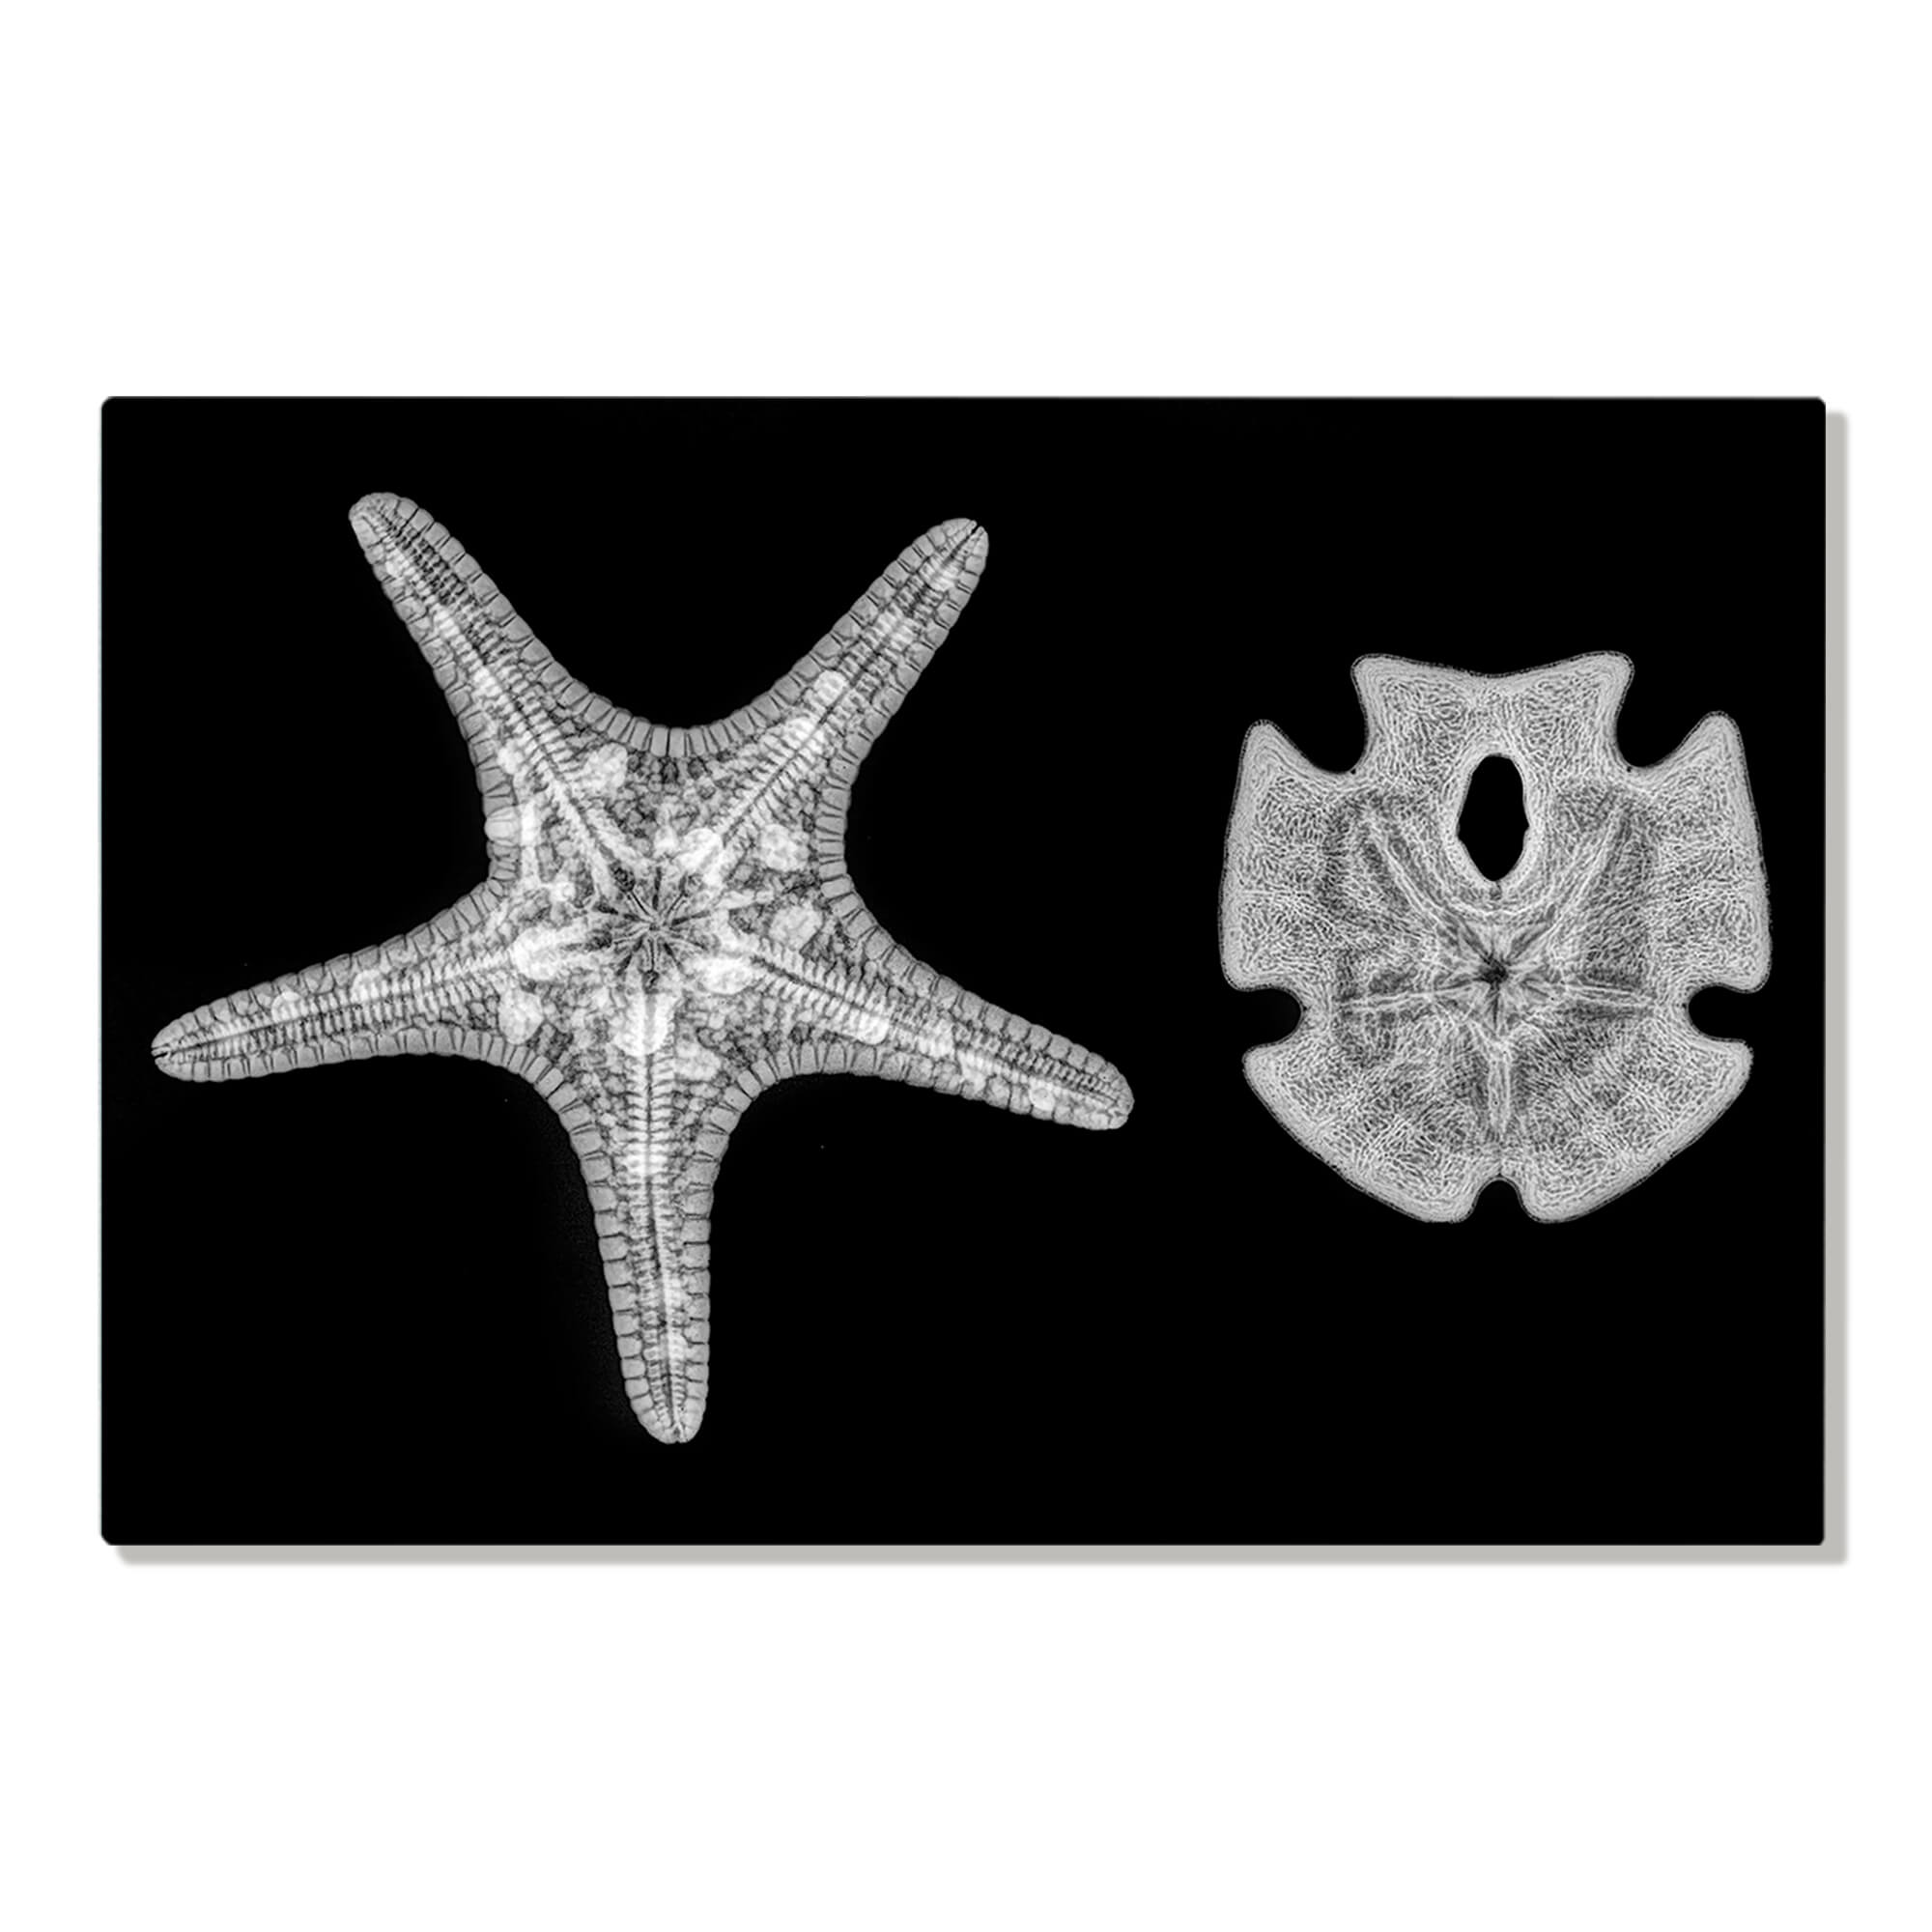 Metal art print of an X-ray print of a starfish and a sand dollar by Hawaii artist Michelle Smith